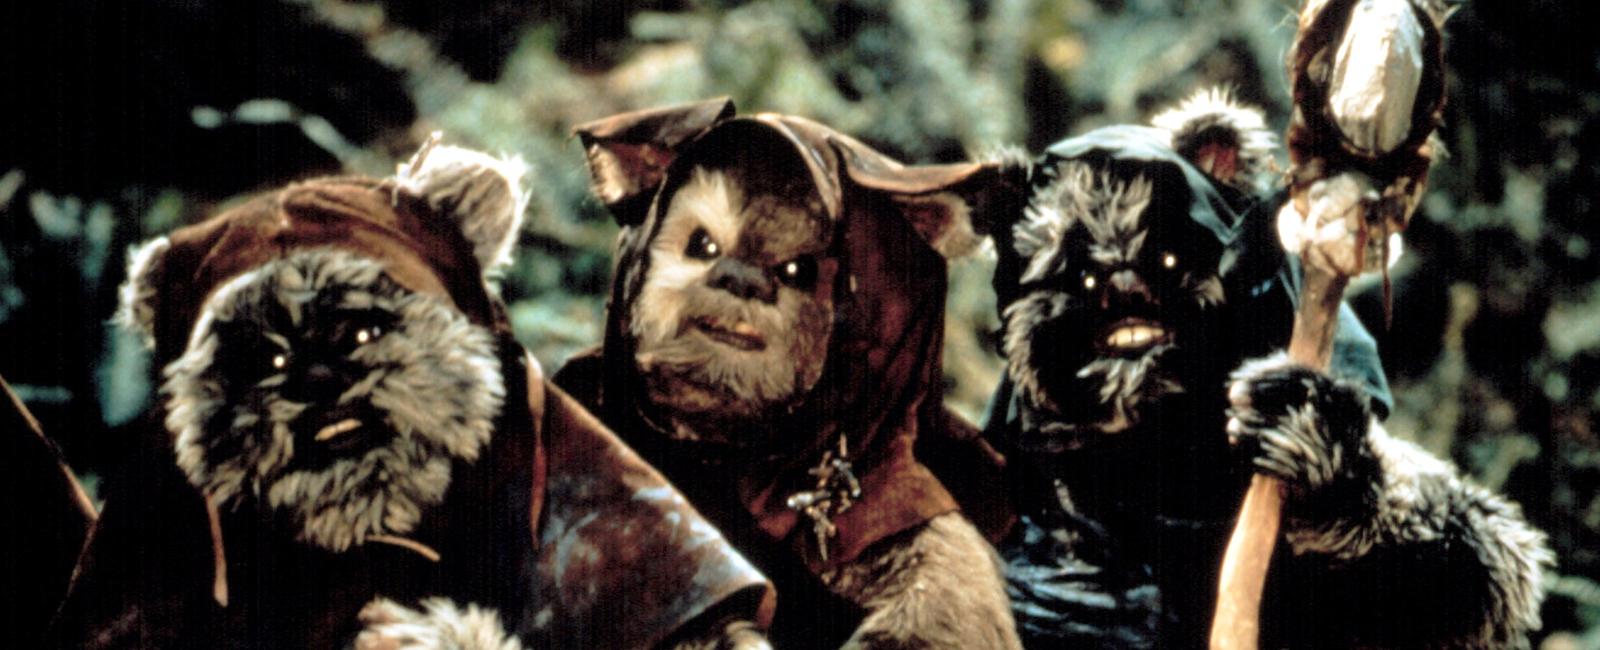 The language of the ewoks in the star wars films is a combination of tibetan and nepalese phrases